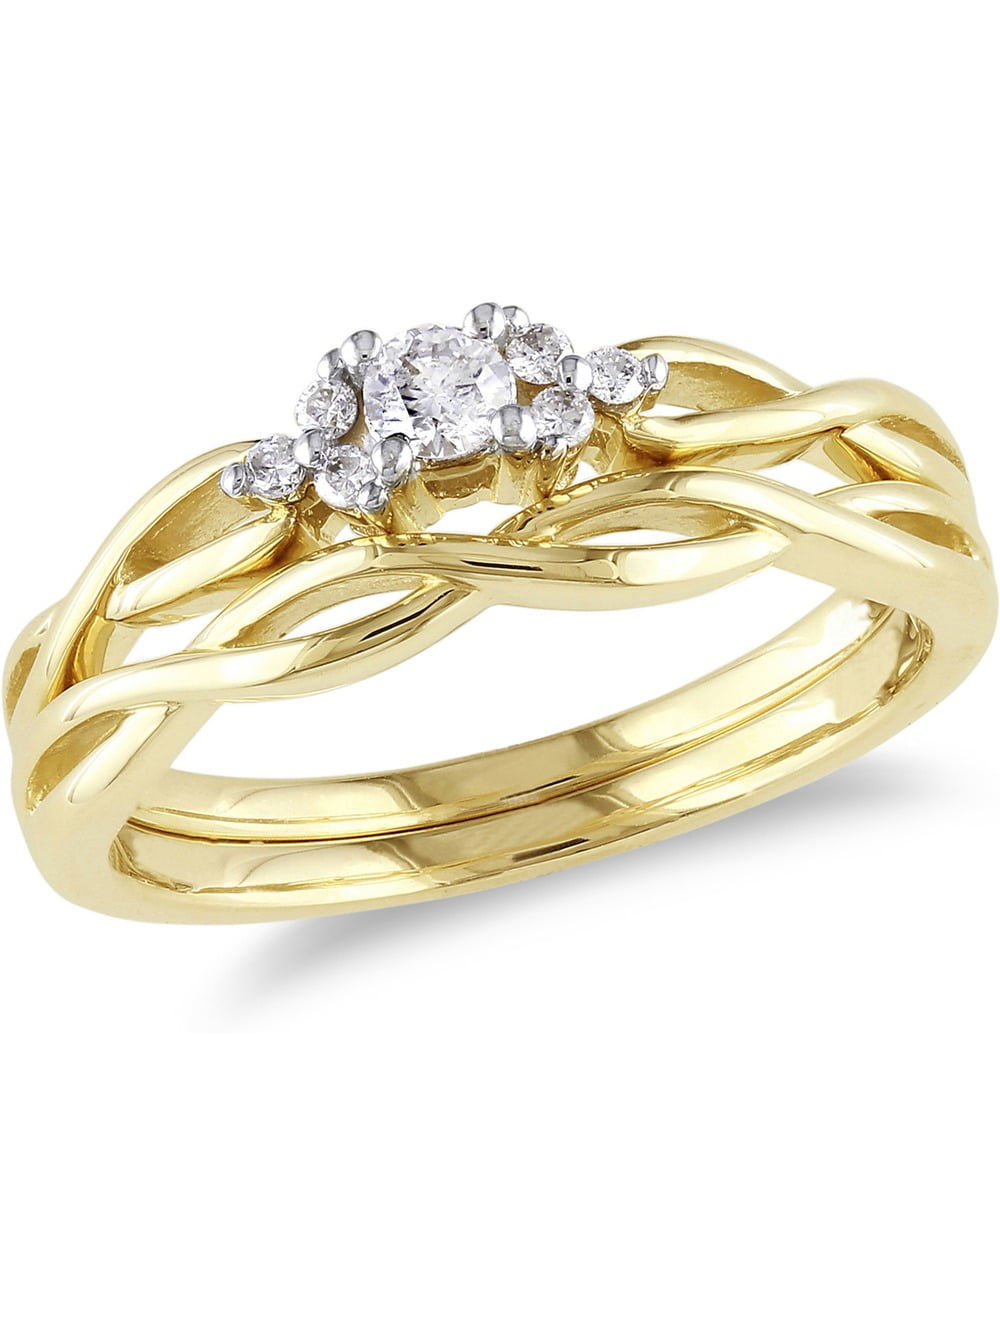 Diamond Wedding Band in 10K Yellow Gold G-H,I2-I3 Size-7 1/6 cttw,